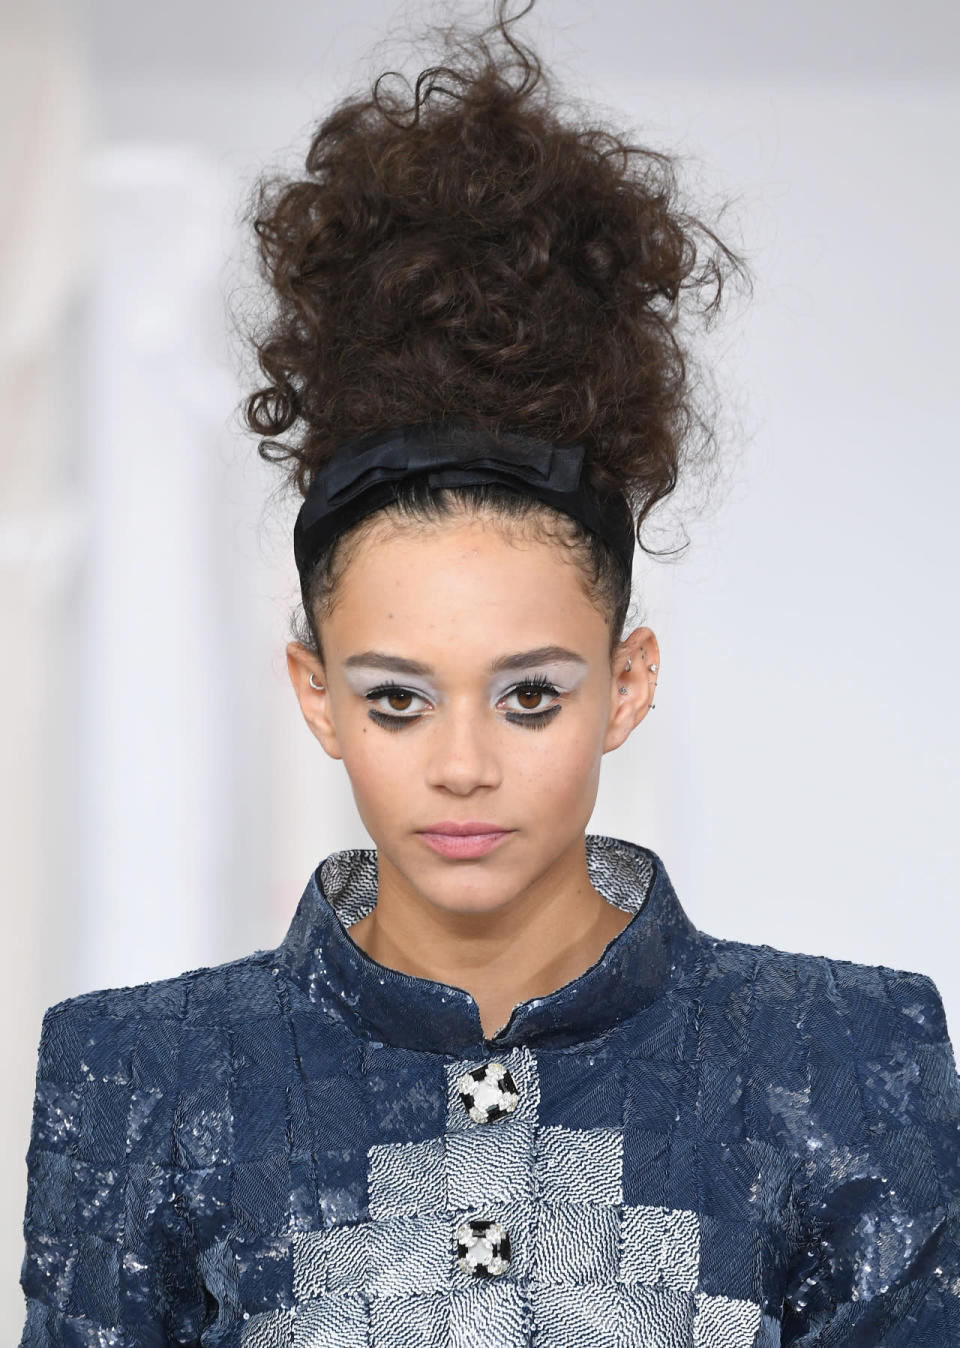 Chanel: Towering curly topknot & doll eye makeup